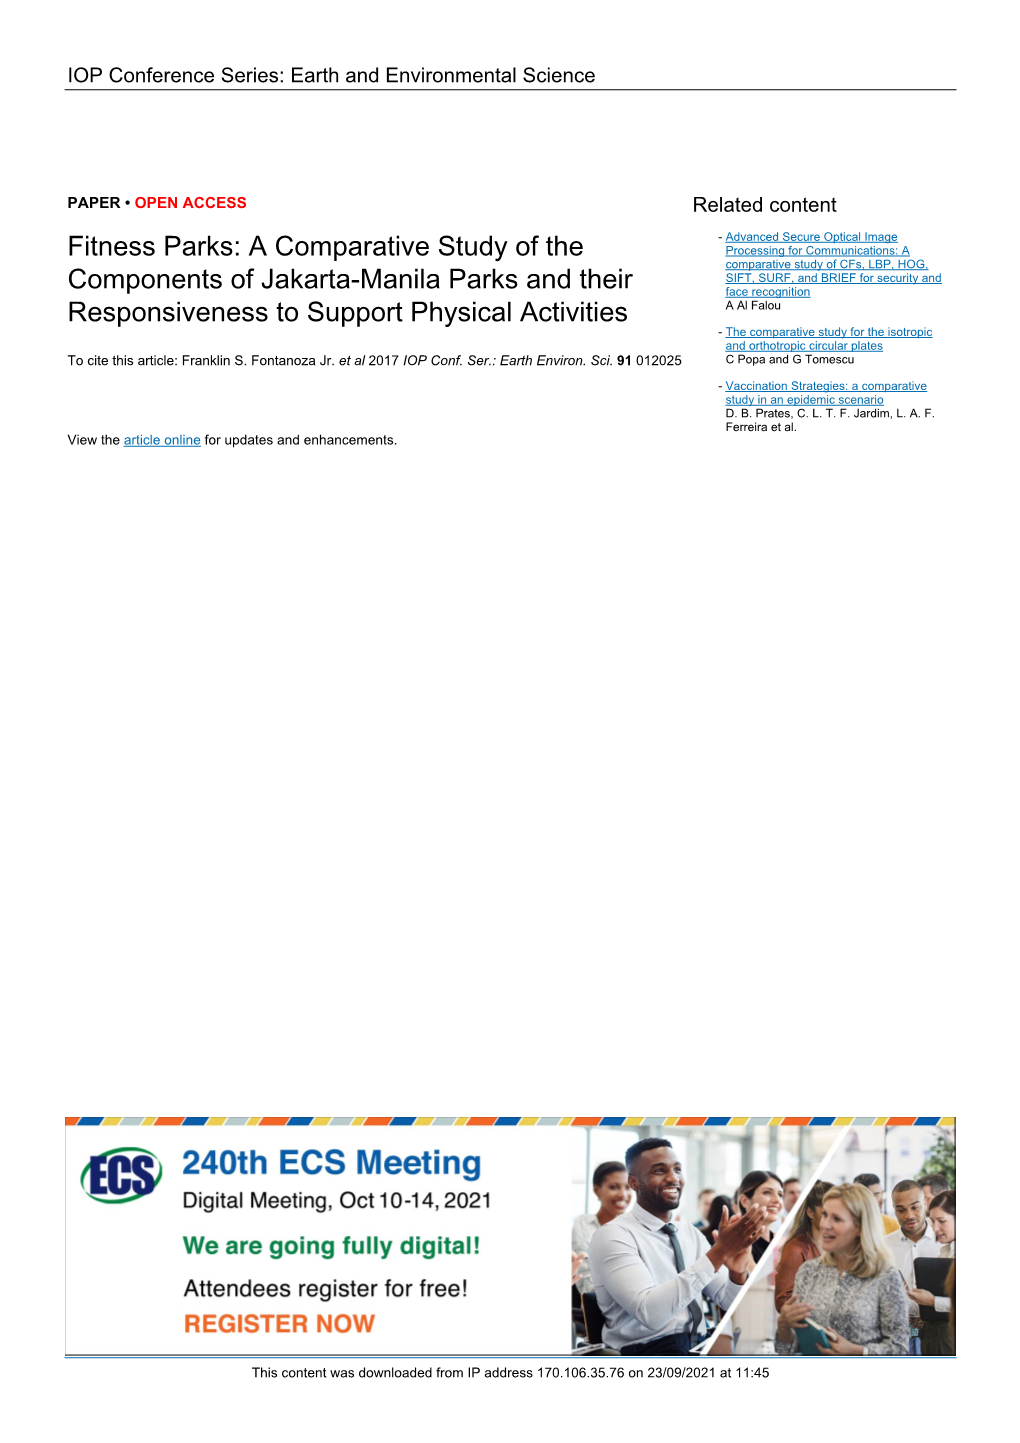 Fitness Parks: a Comparative Study of the Components of Jakarta-Manila Parks and Their Responsiveness to Support Physical Activities